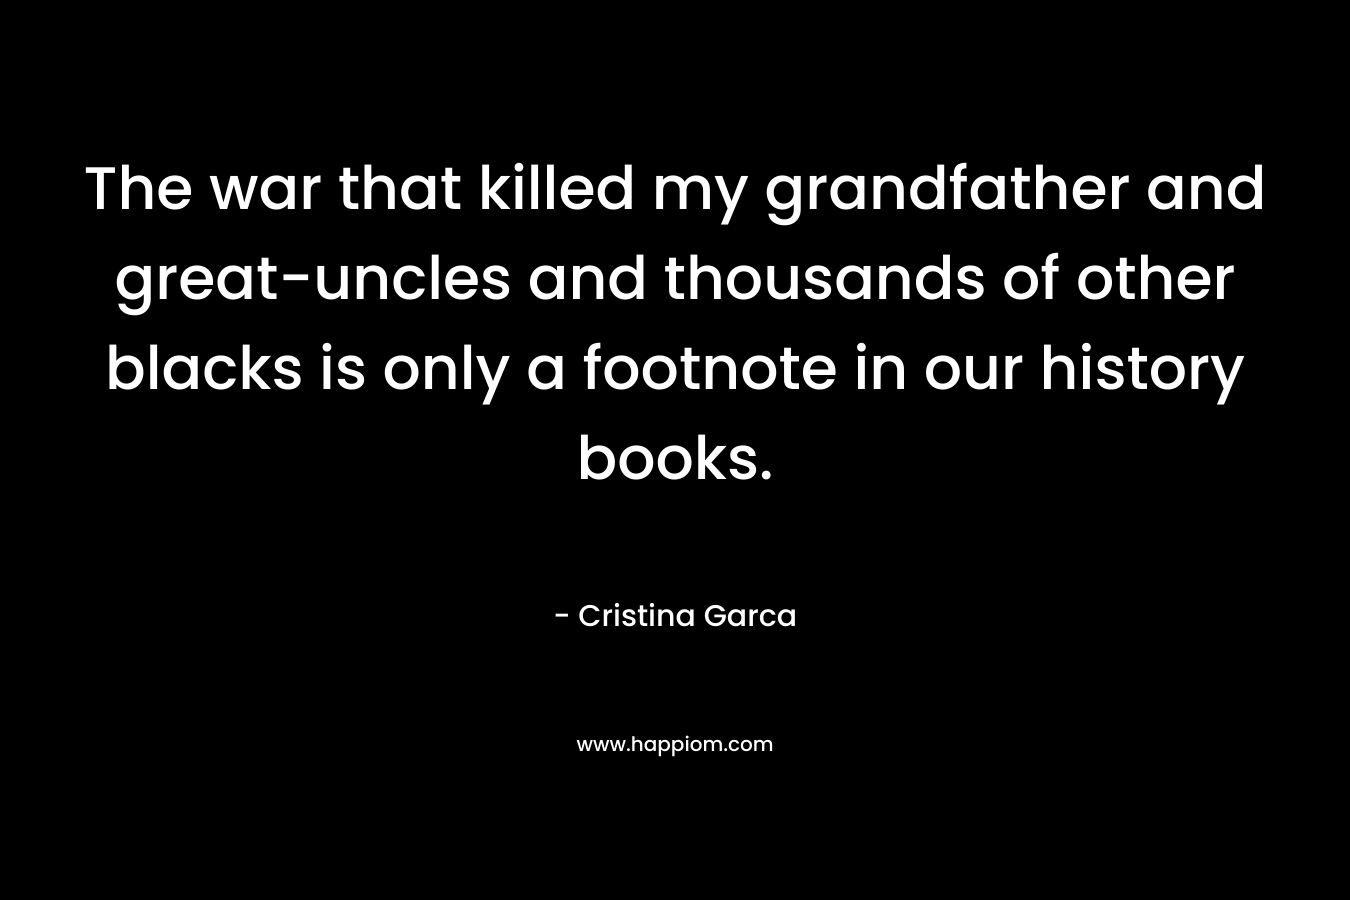 The war that killed my grandfather and great-uncles and thousands of other blacks is only a footnote in our history books.